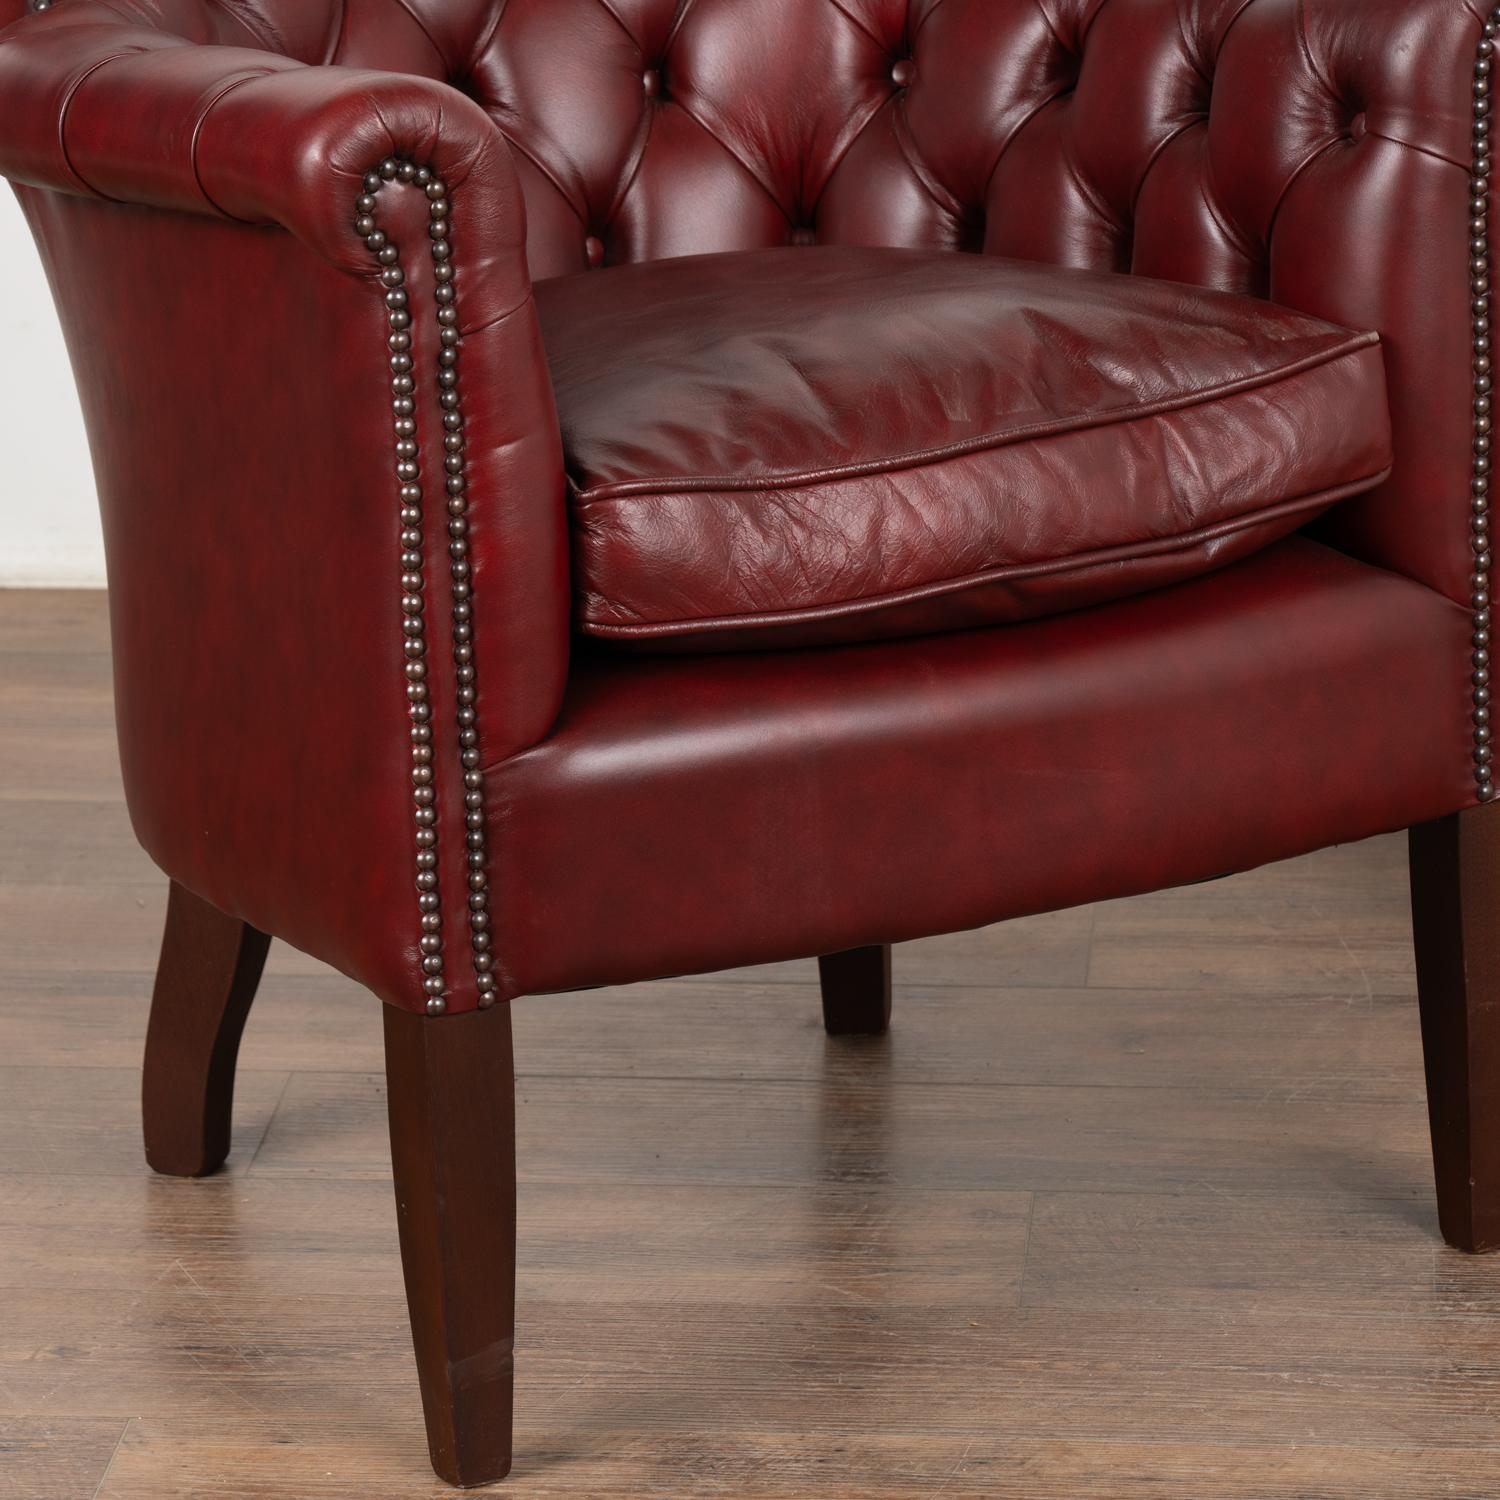 Pair, Vintage Red Leather Chesterfield Club Armchairs, Denmark circa 1940-60 For Sale 2